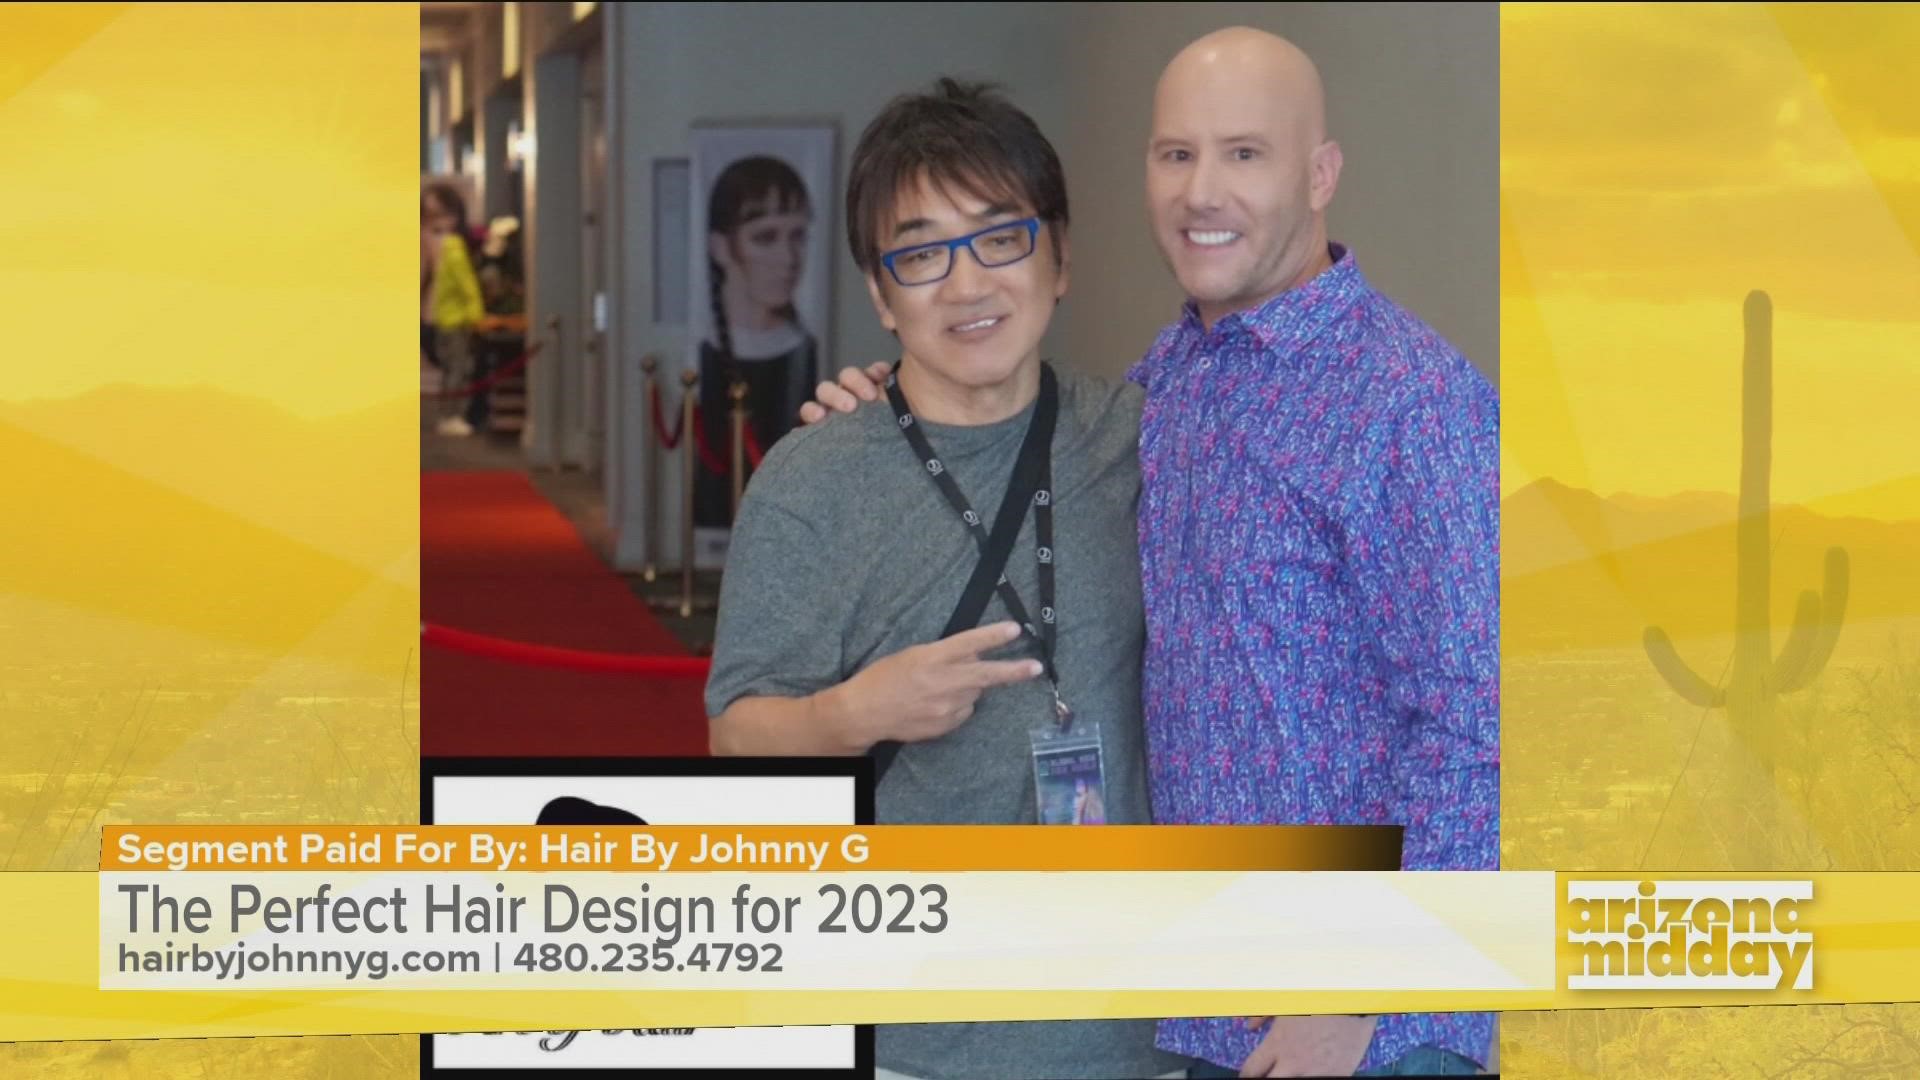 World renowned celebrity hair stylist shares his 3D hair design technique |  